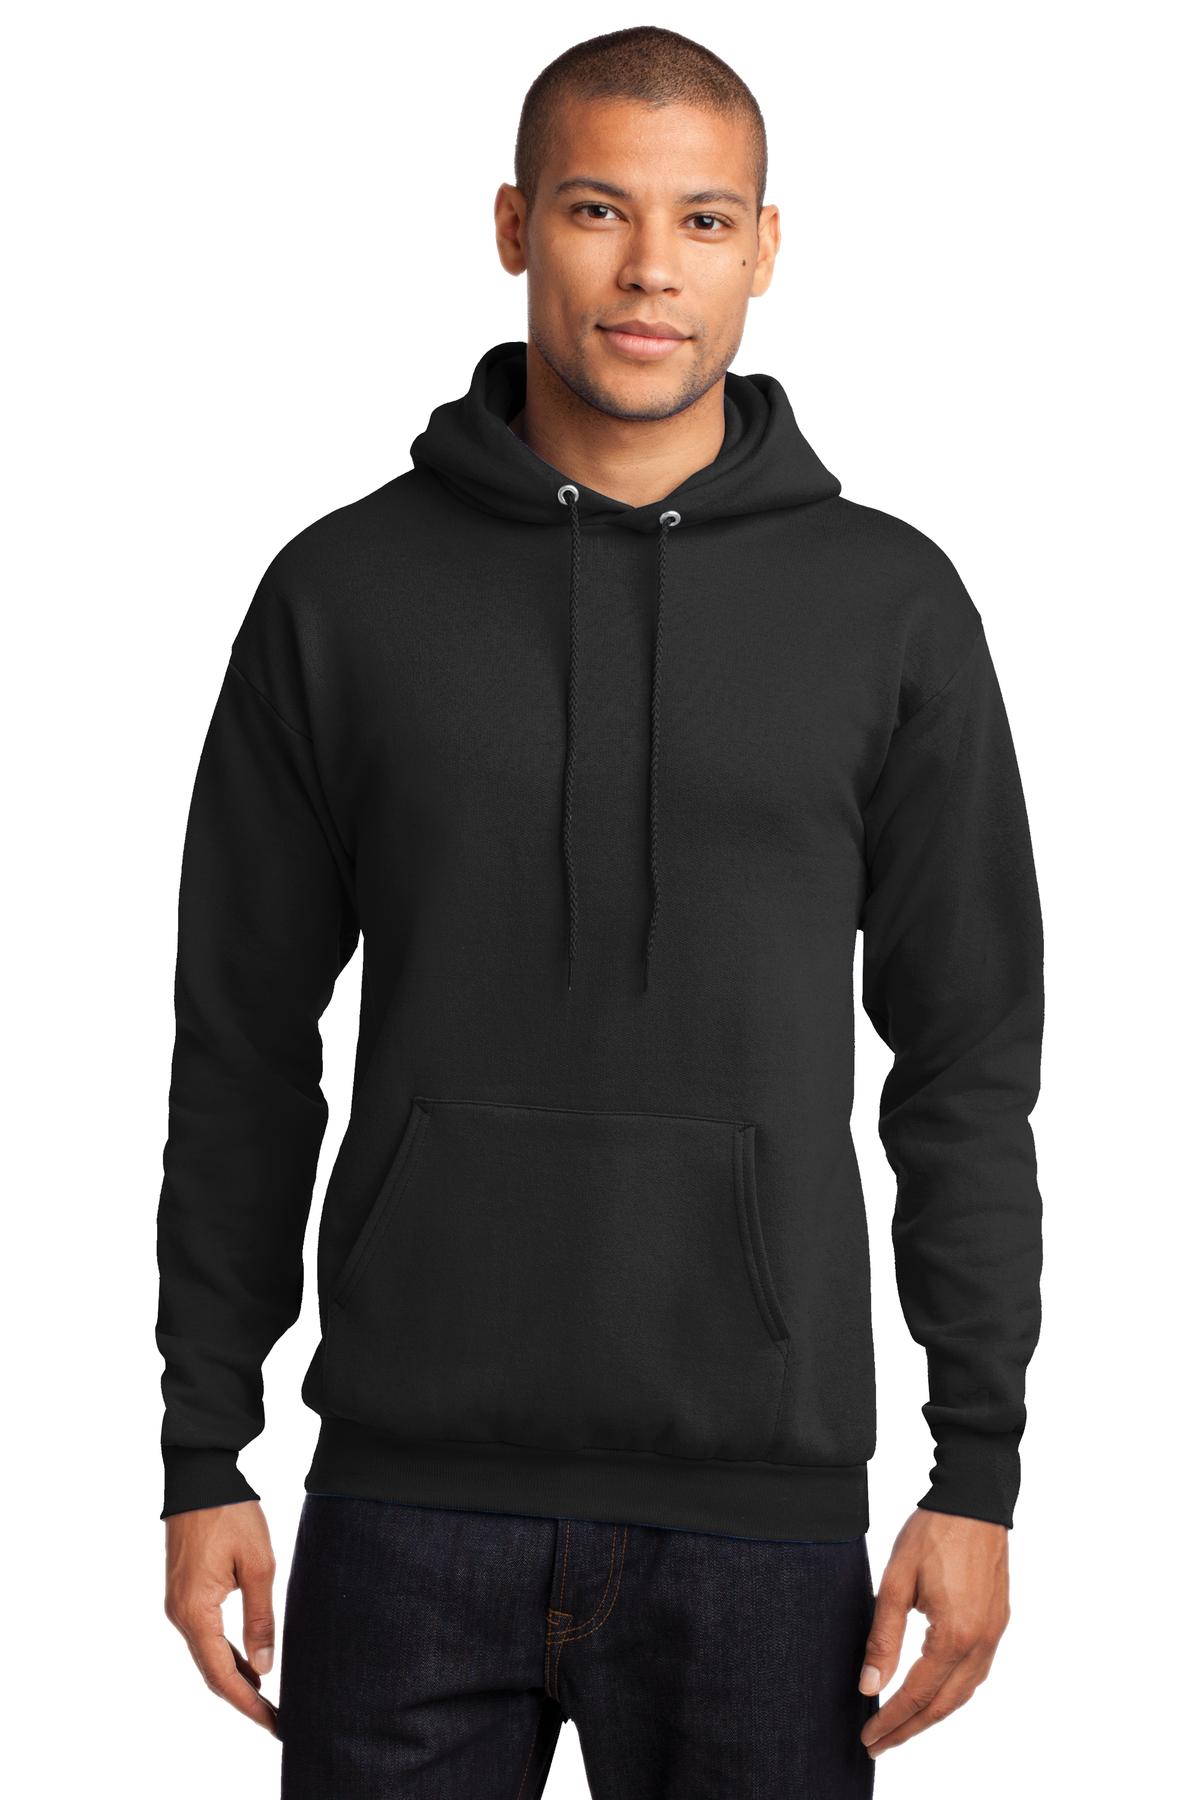 Port and Company - Core Fleece Pullover Hooded Sweatshirt. PC78H